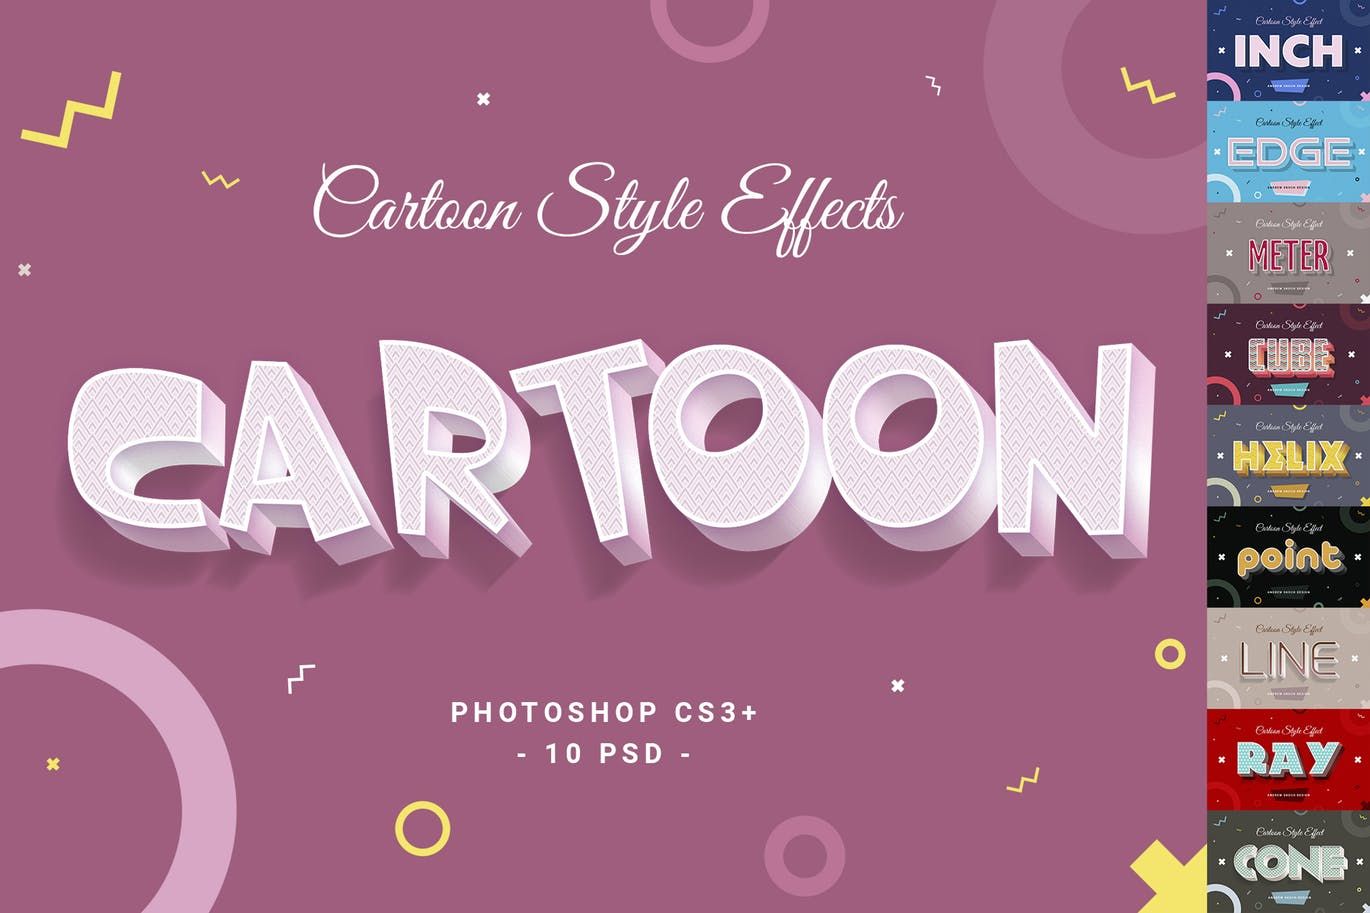 A cartoon style text effects for photoshop